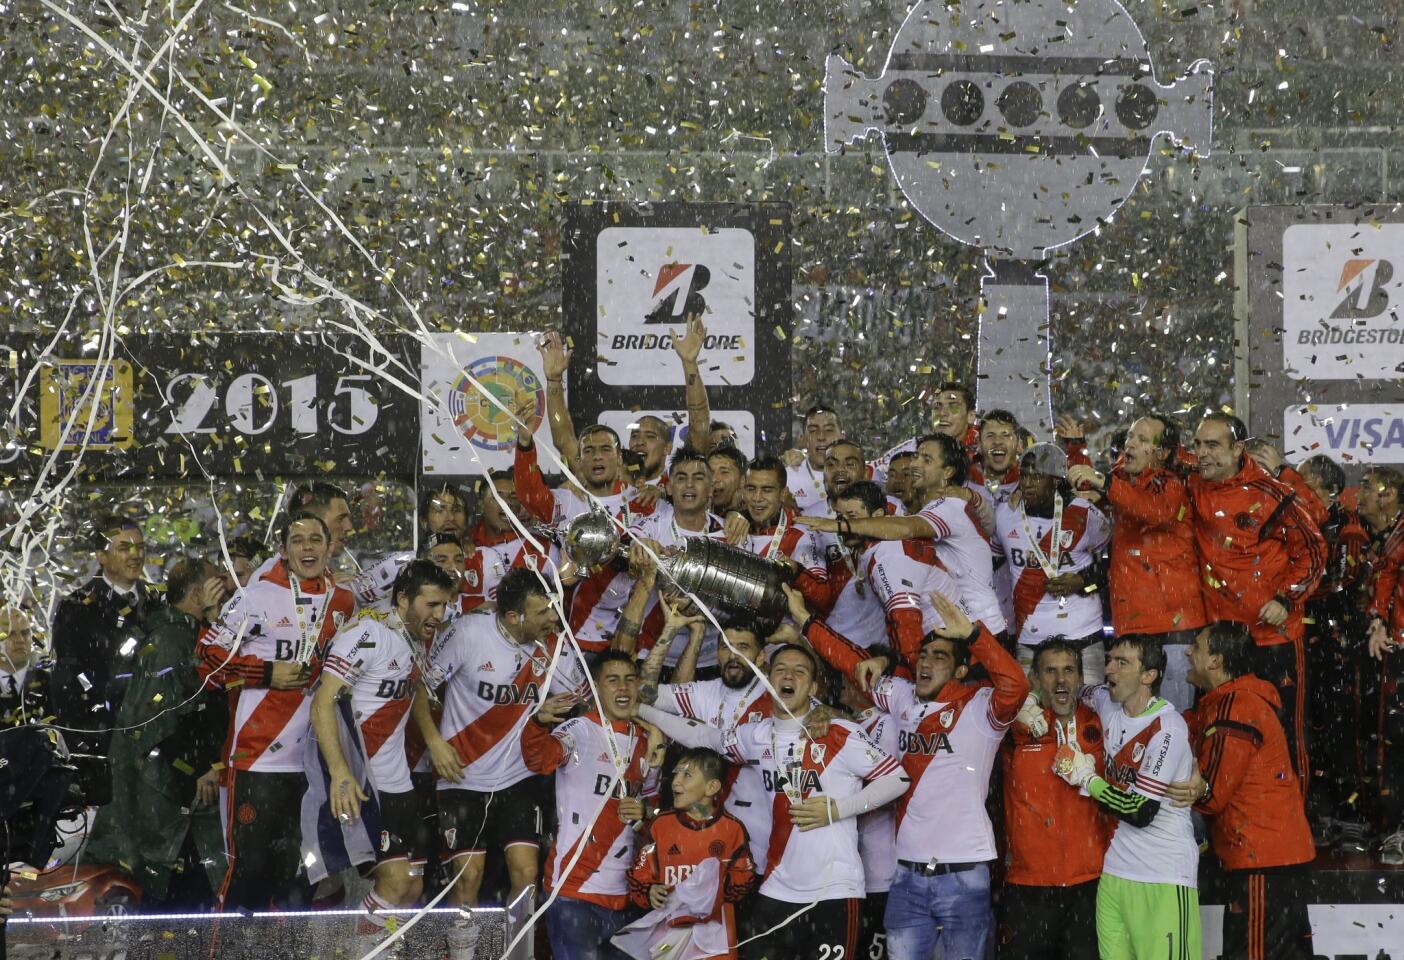 Argentina's River Plate players and staff hold the trophy aloft while they celebrate winning the the Copa Libertadores final soccer match against Mexico's Tigres in Buenos Aires, Argentina, Thursday, Aug. 6, 2015. River defeated Tigres 3-0 and became the tournament champions. (AP Photo/Ivan Fernandez)